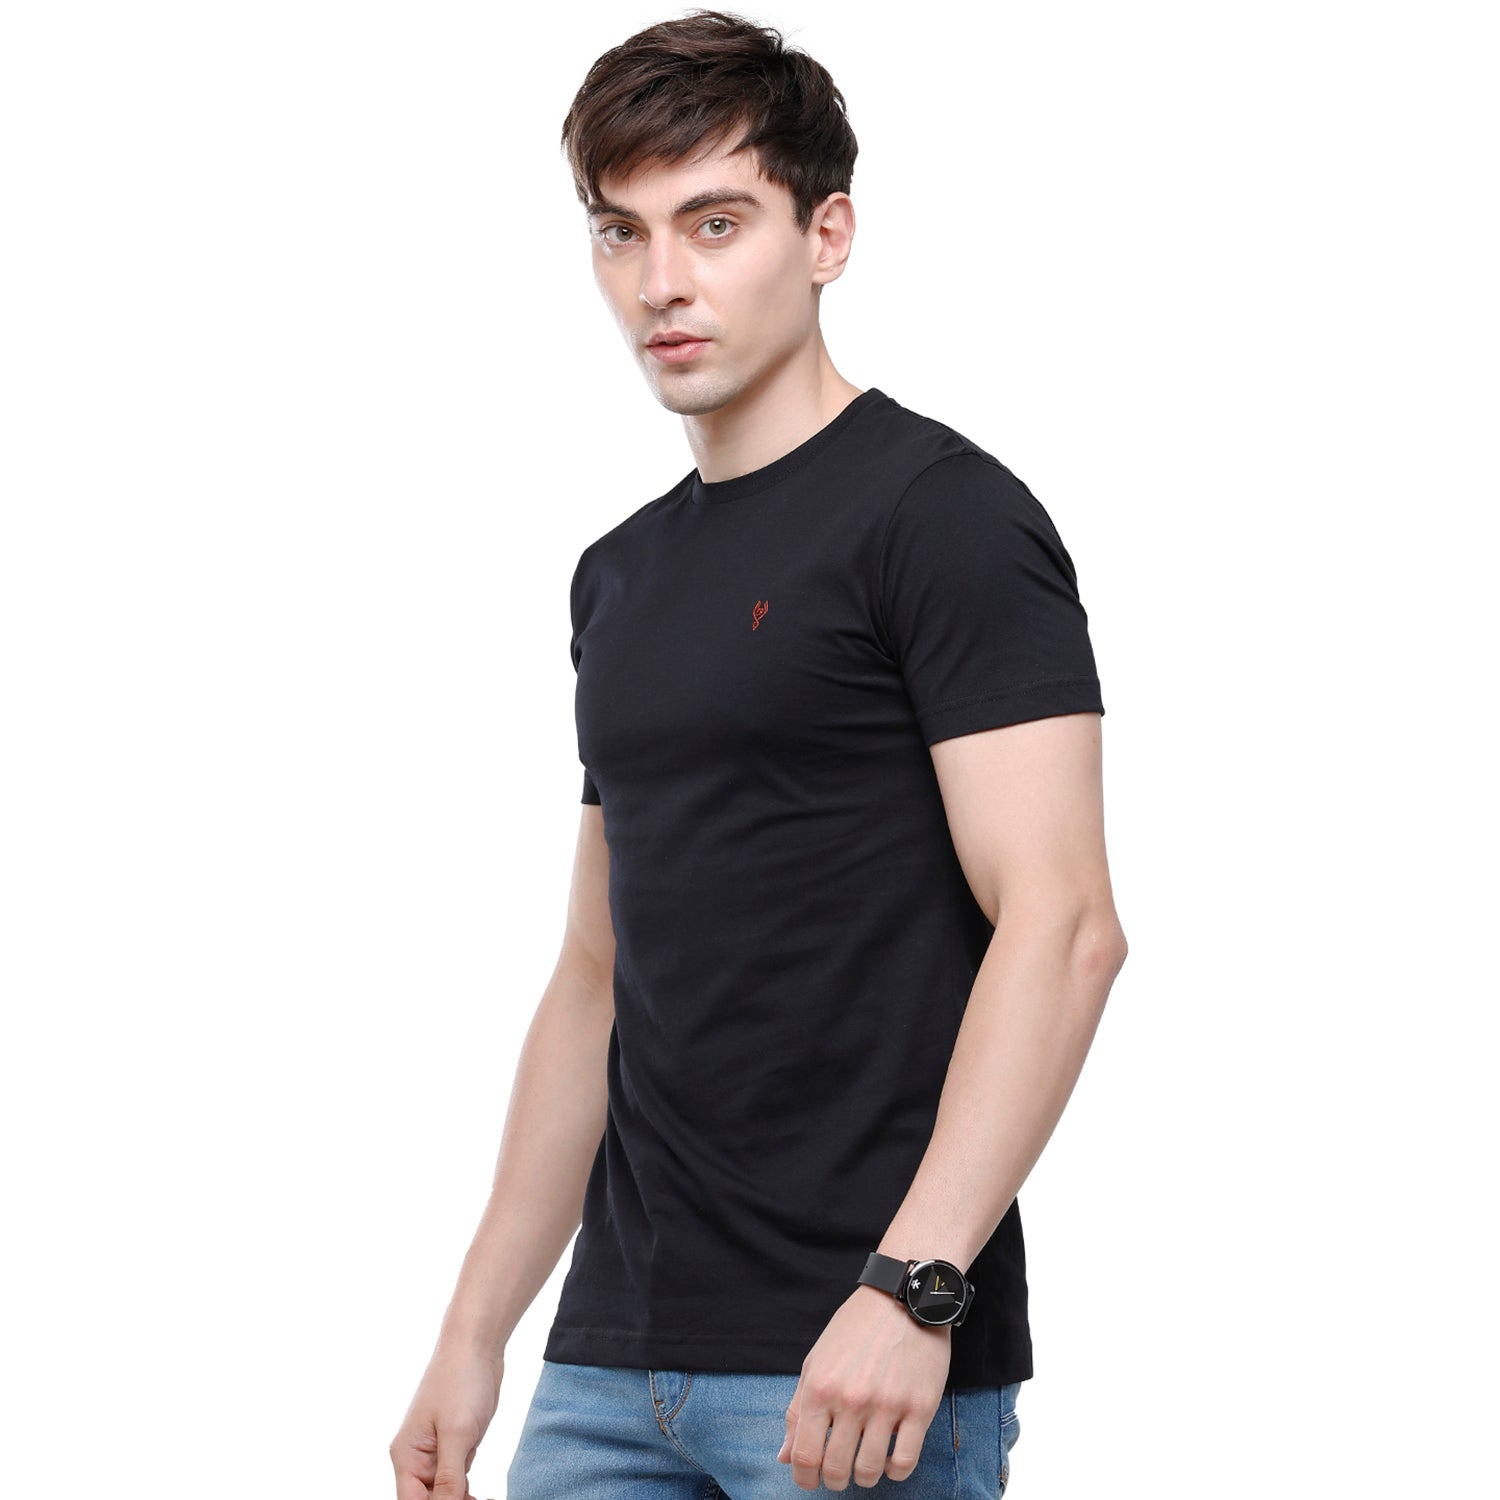 Classic Polo Men's Solid Single Jersey Black Half Sleeve Slim Fit T-Shirt - Kore-09 T-shirt Classic Polo 